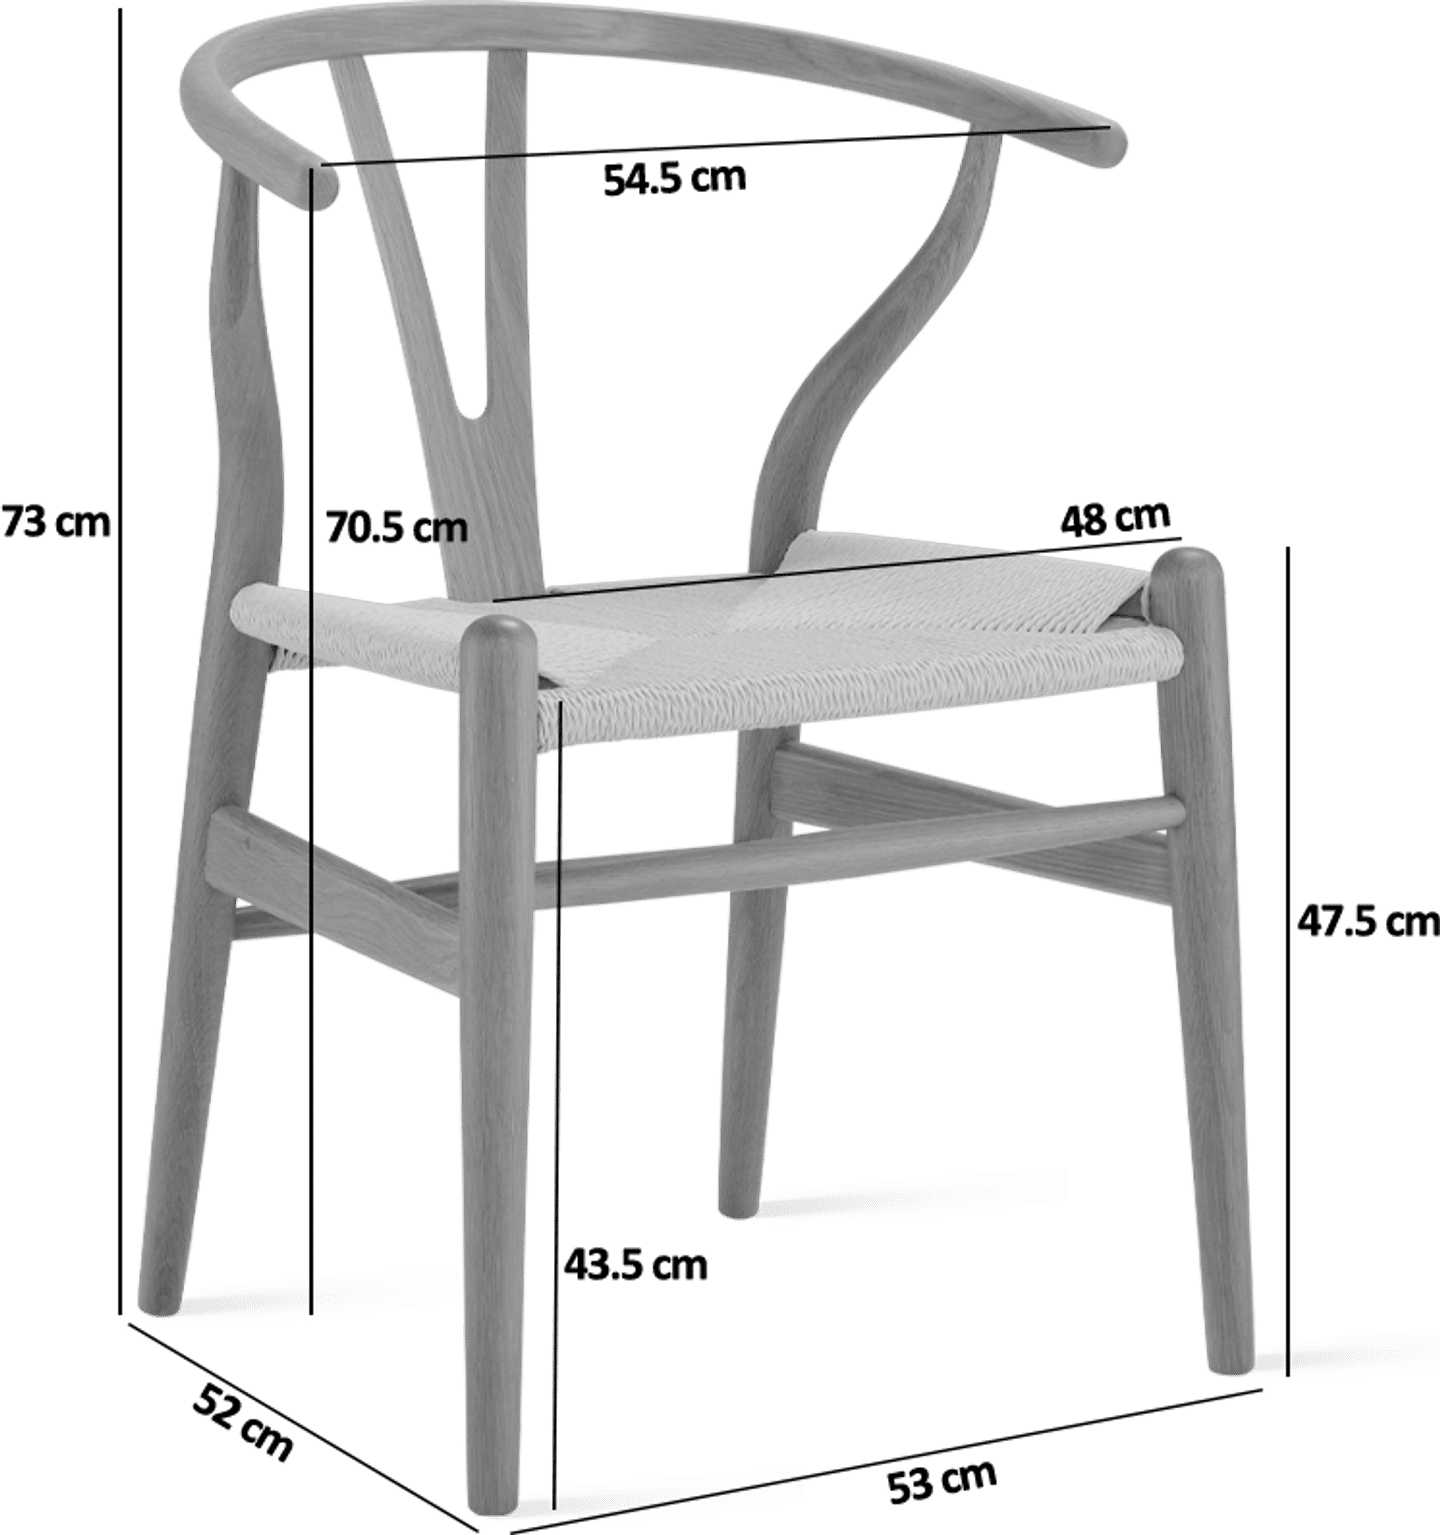 Wishbone (Y) Chair - CH24 Lacquered/Light Grey image.